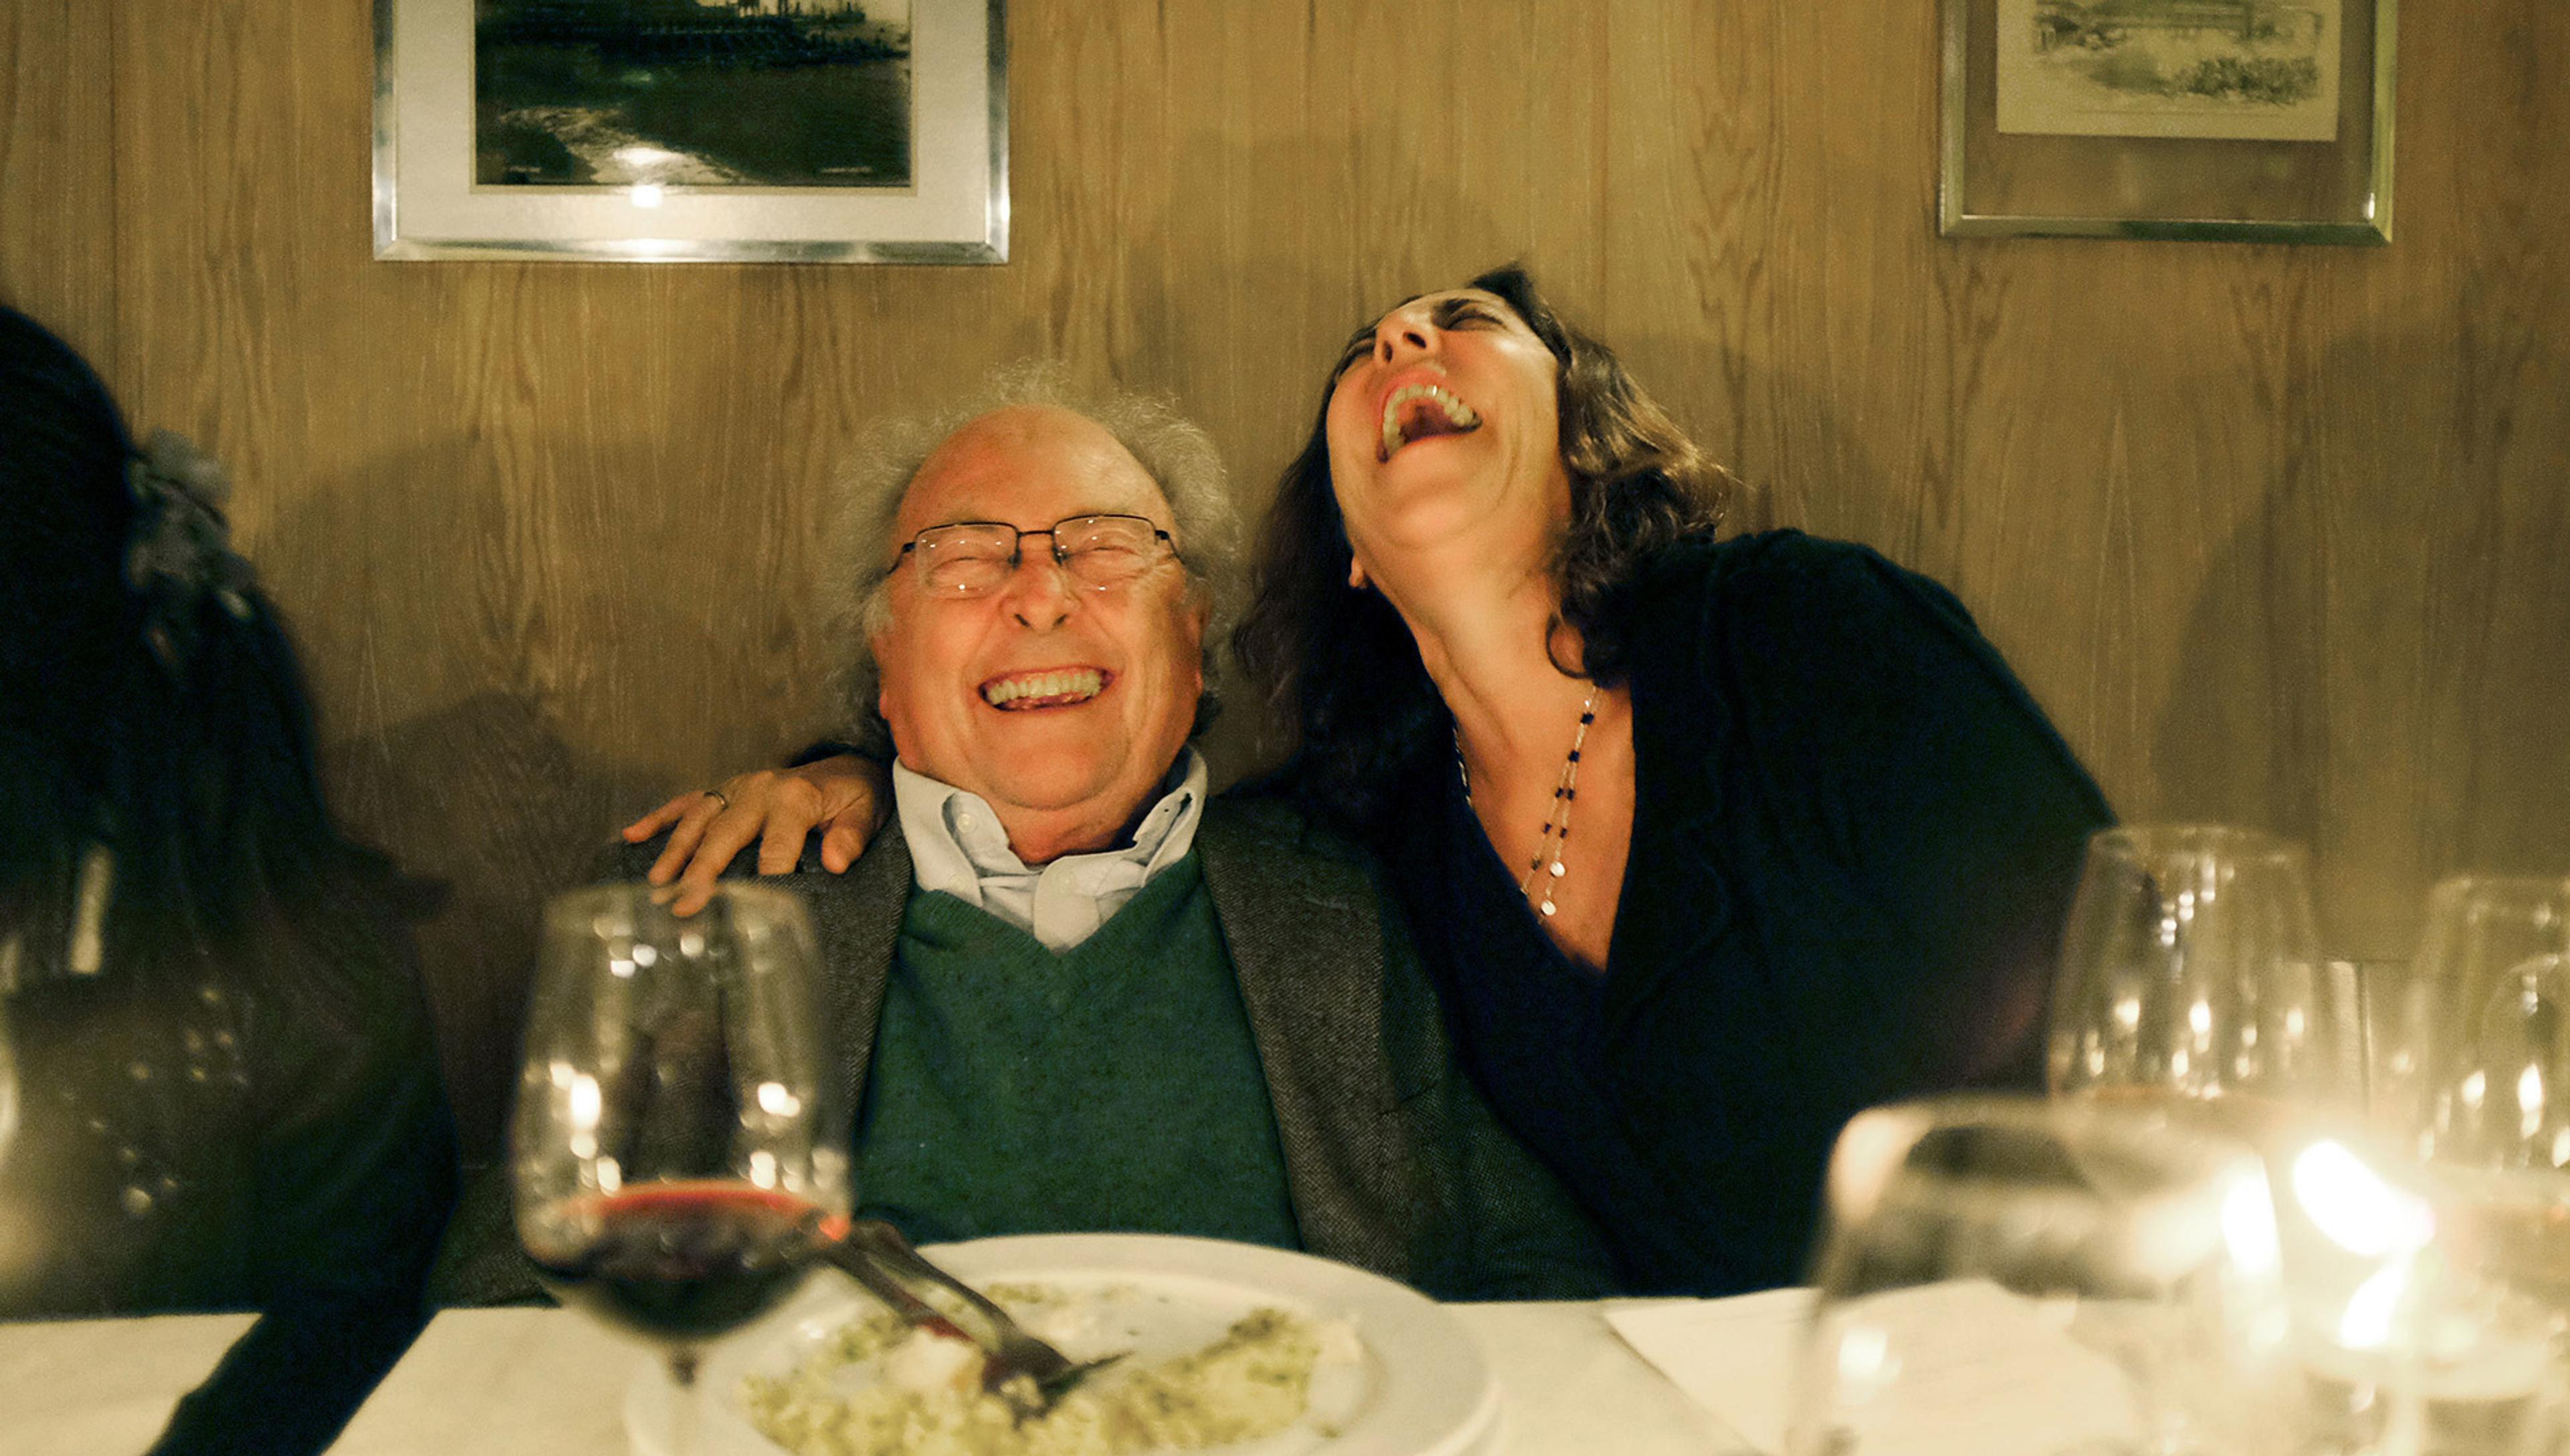 A man and a woman laughing together in a restaurant